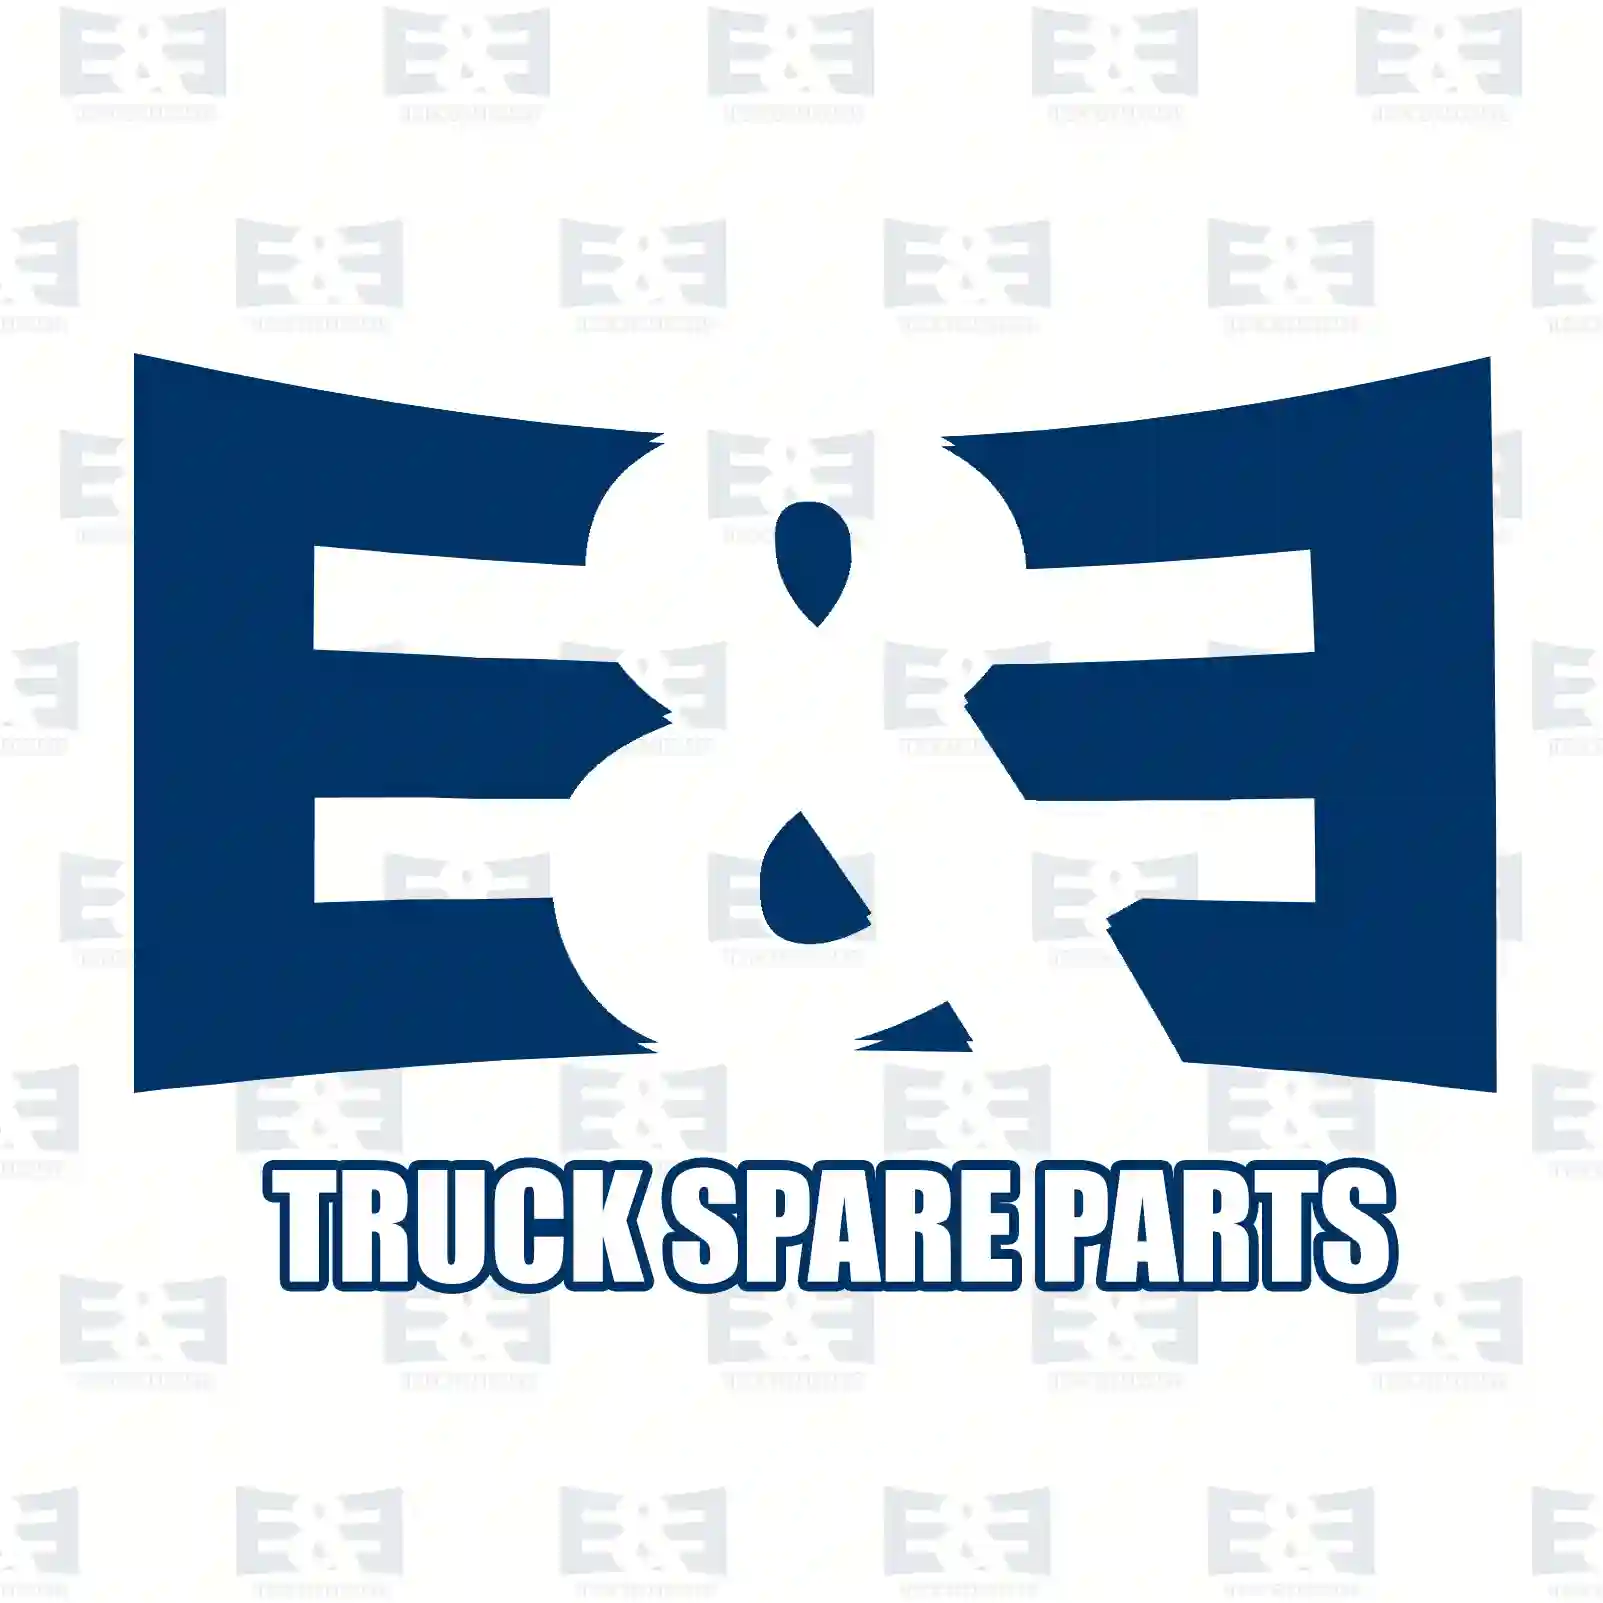  Screw with nut || E&E Truck Spare Parts | Truck Spare Parts, Auotomotive Spare Parts